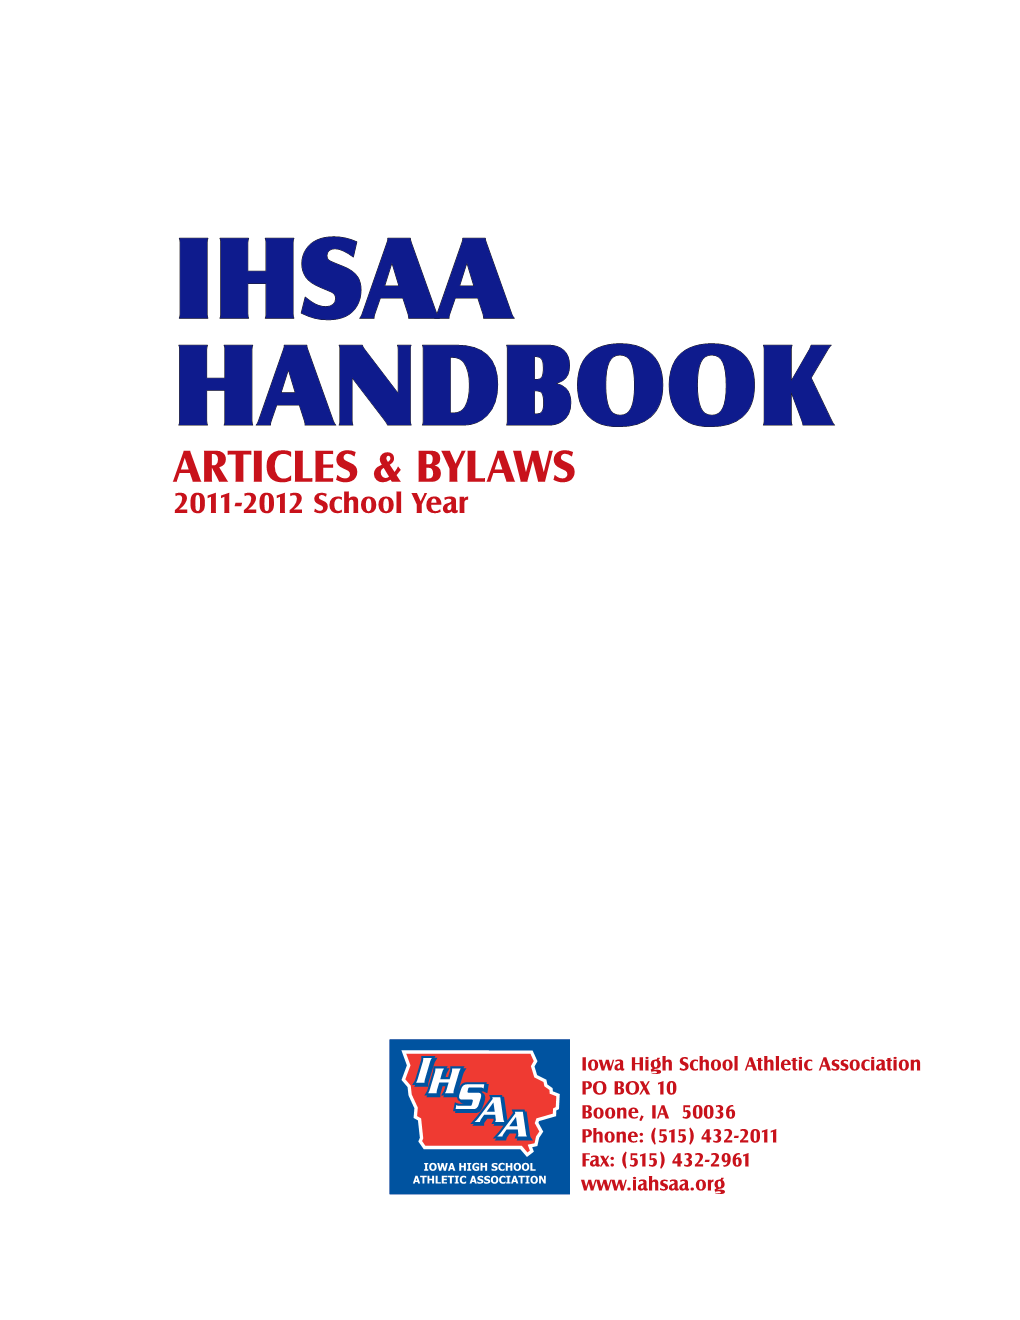 Articles & Bylaws